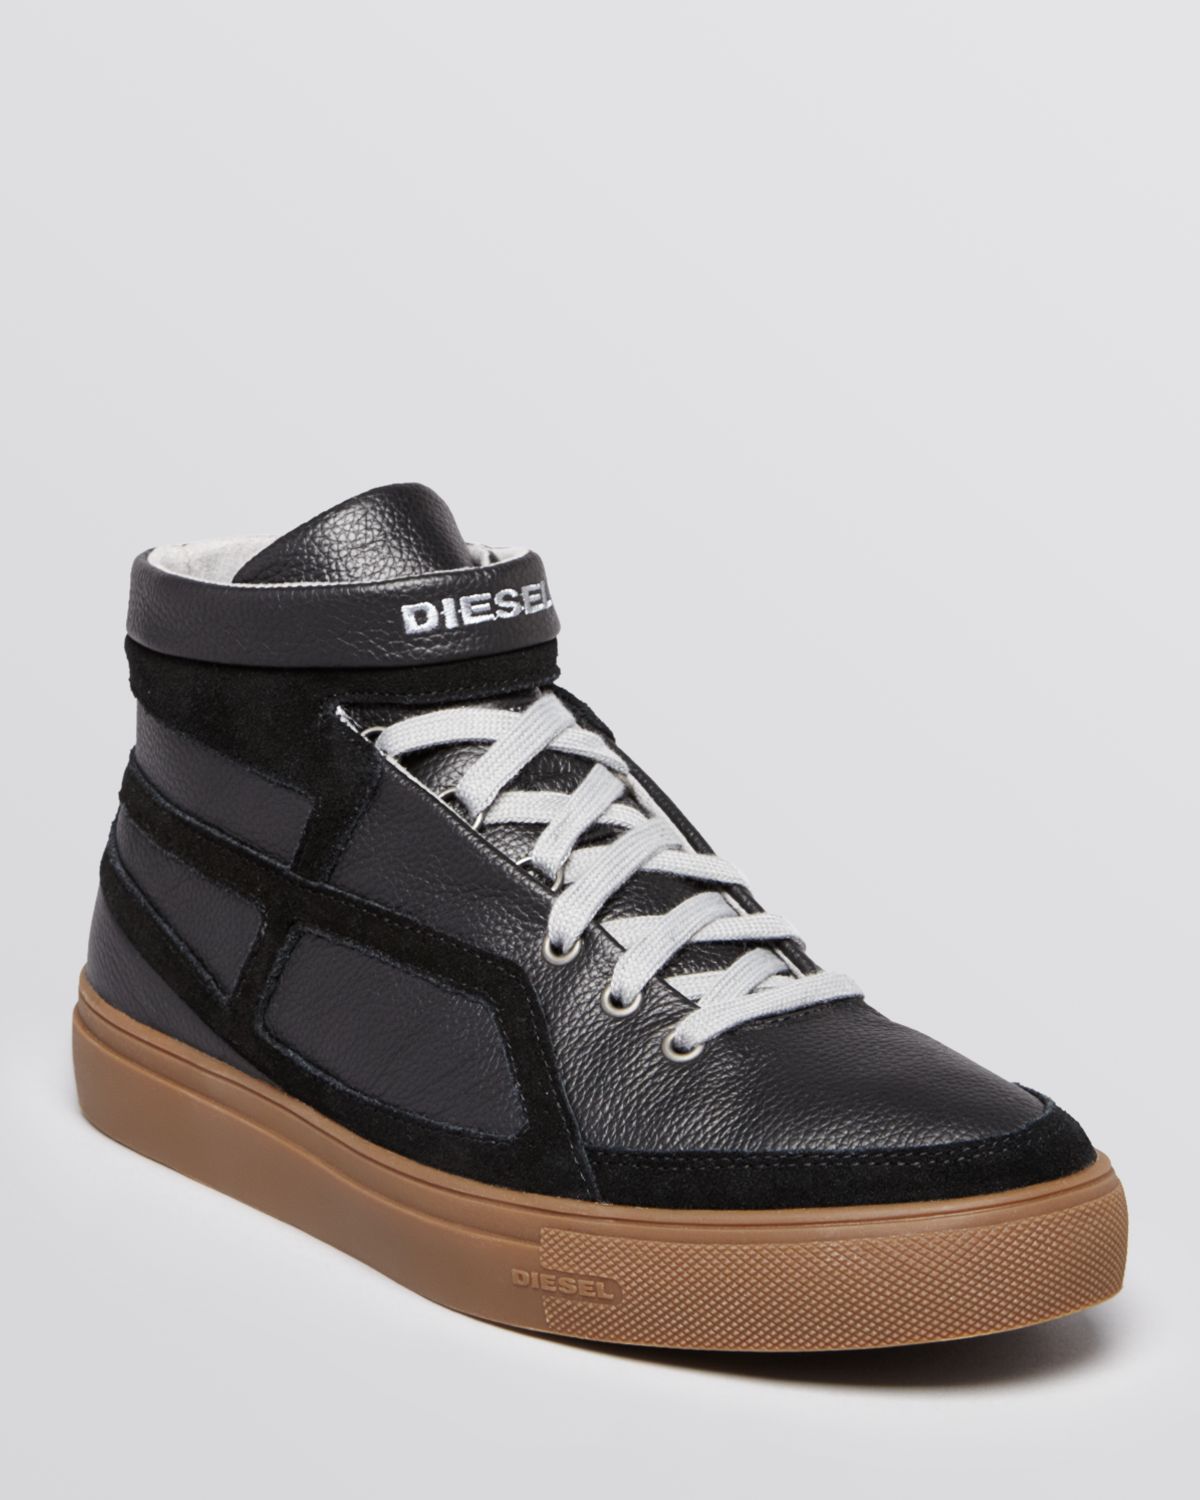 DIESEL Usa Project Route High Top Sneakers in Black for Men - Lyst